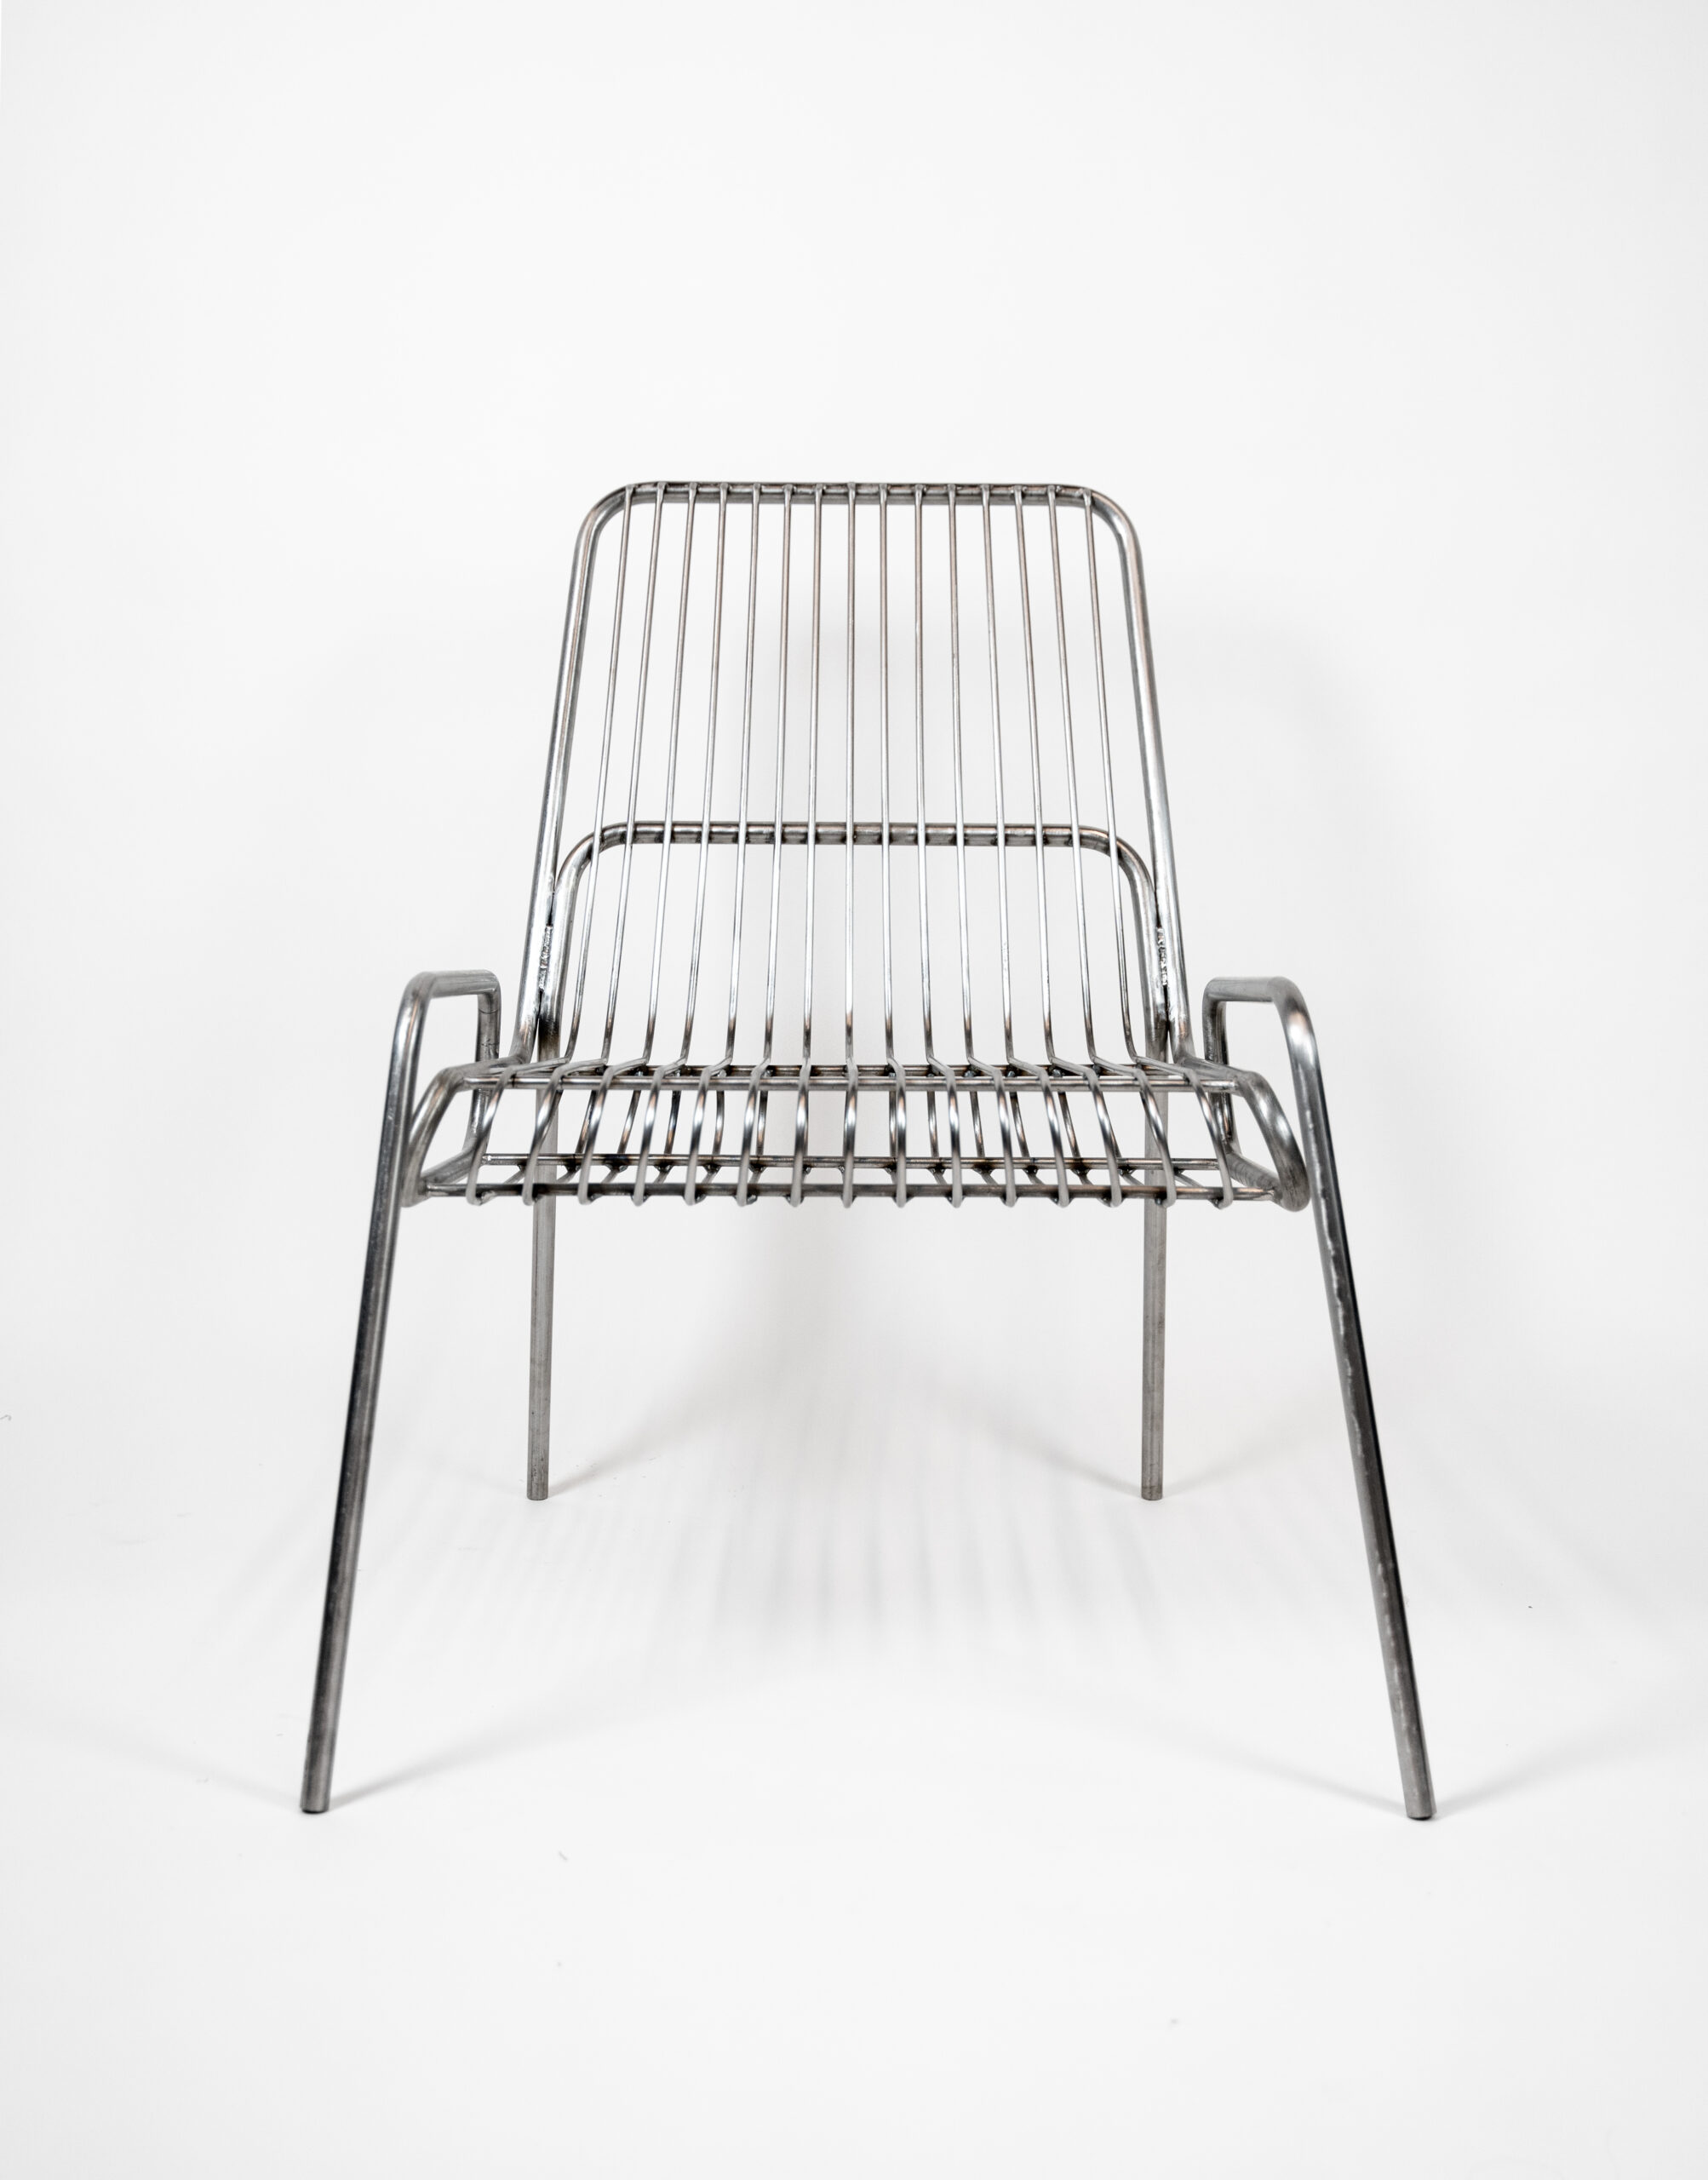 NYCxDESIGN 2023 Meiqing Tian for Clip Chair